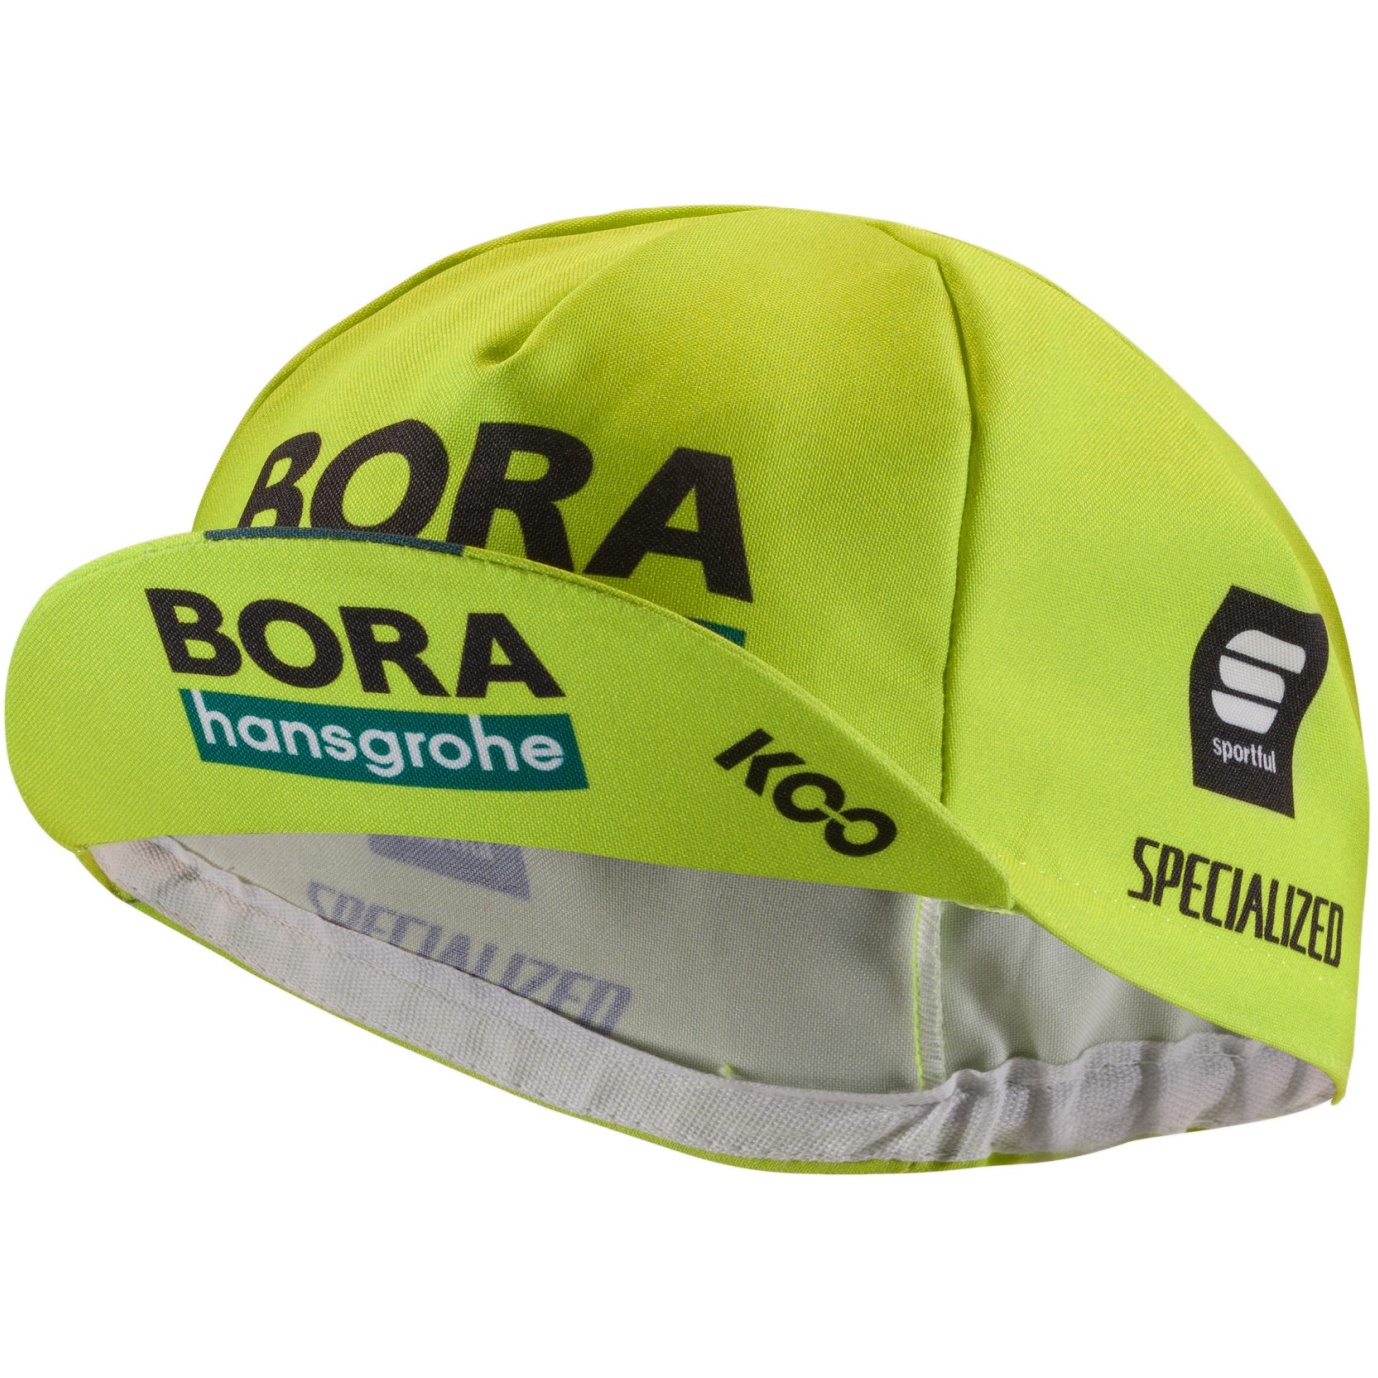 Picture of Sportful BORA-hansgrohe Cycling Cap - 384 Lime